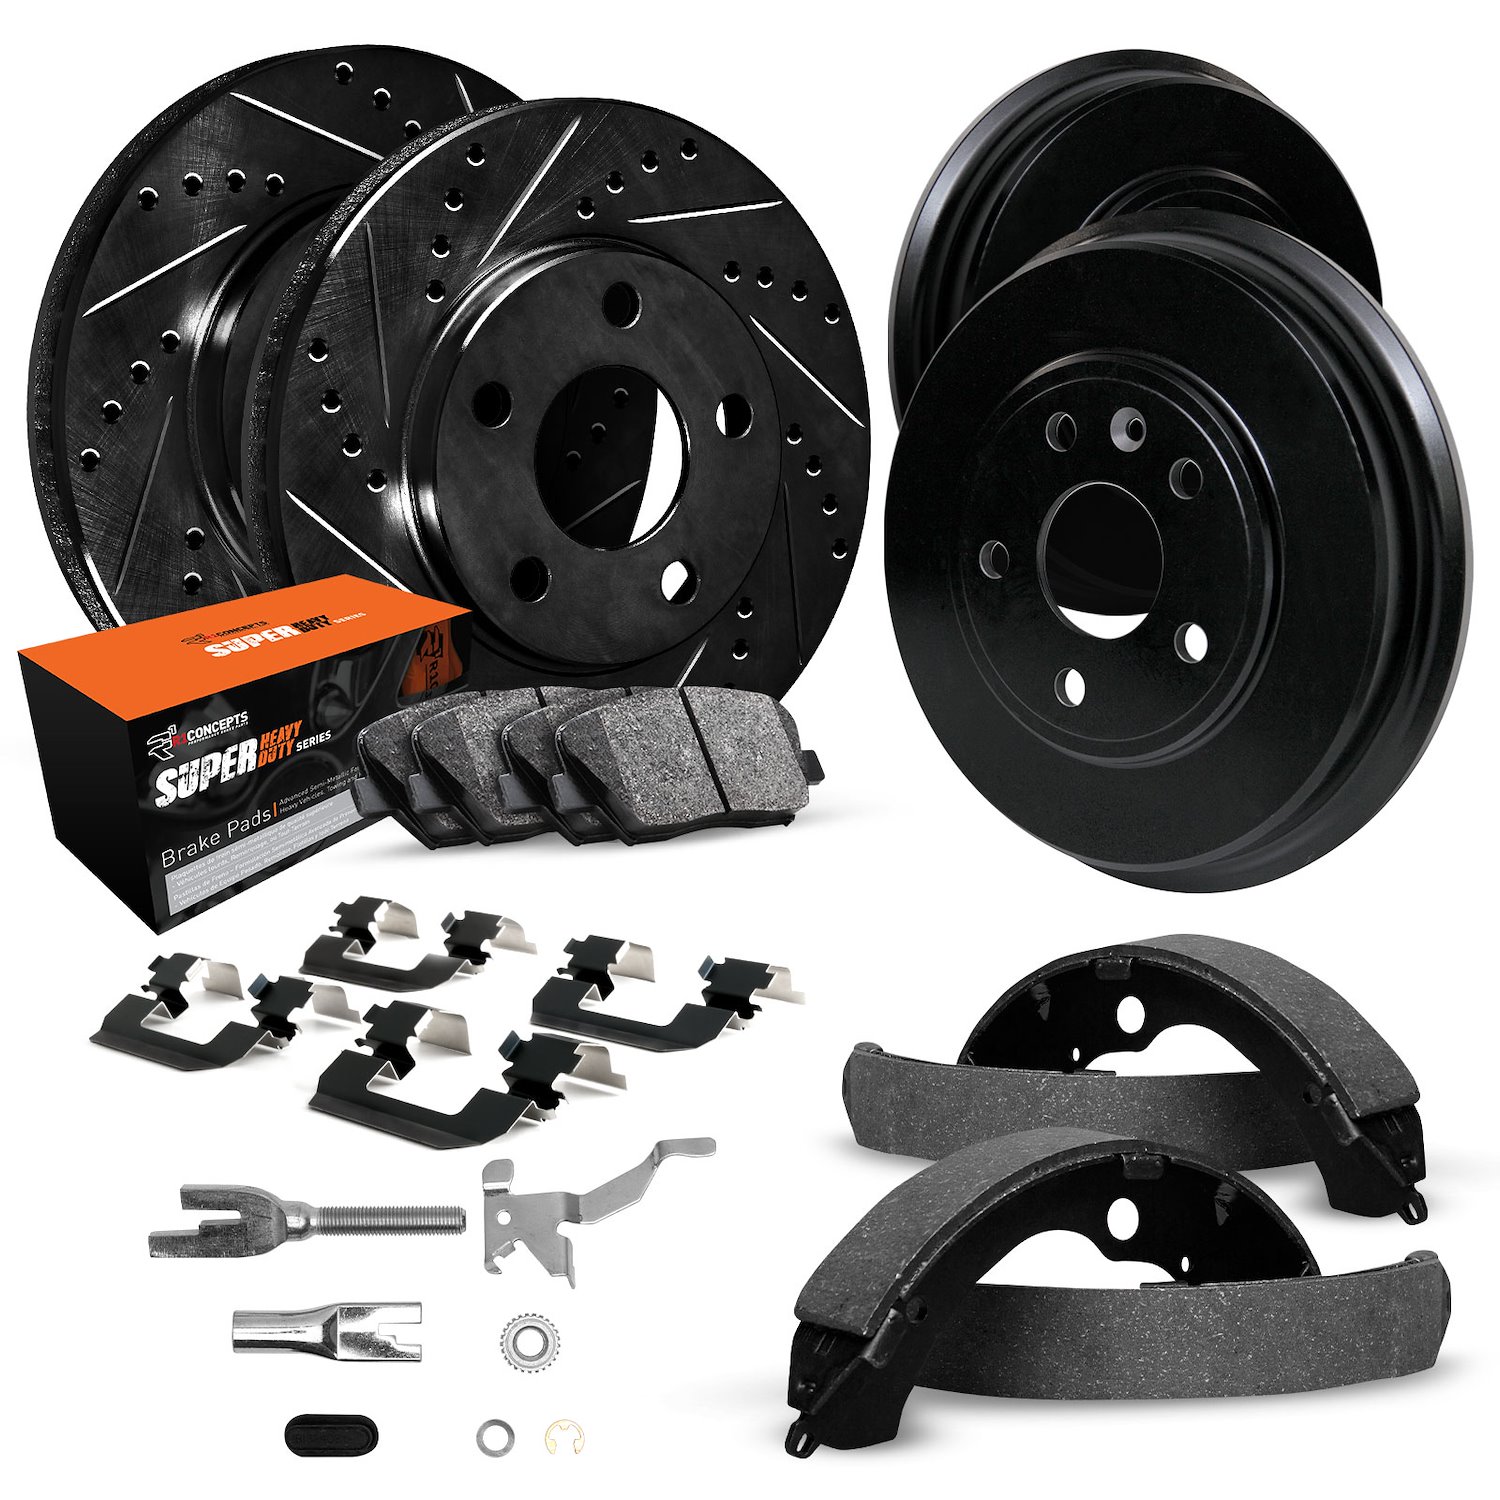 E-Line Drilled/Slotted Black Rotor & Drum Set w/Super-Duty Pads, Shoes, Hardware/Adjusters, 1978-1993 GM